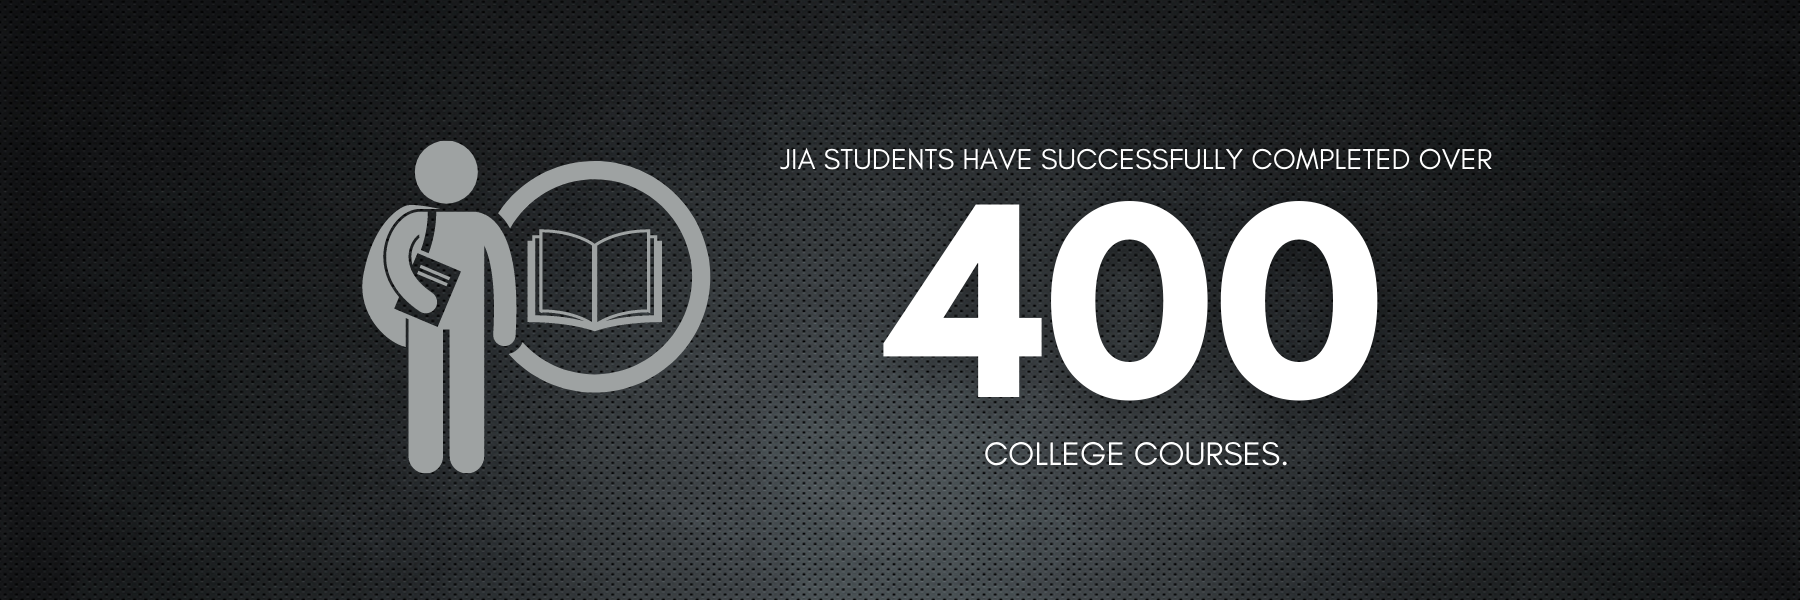 JIA students have successfully completed over 400 college courses.